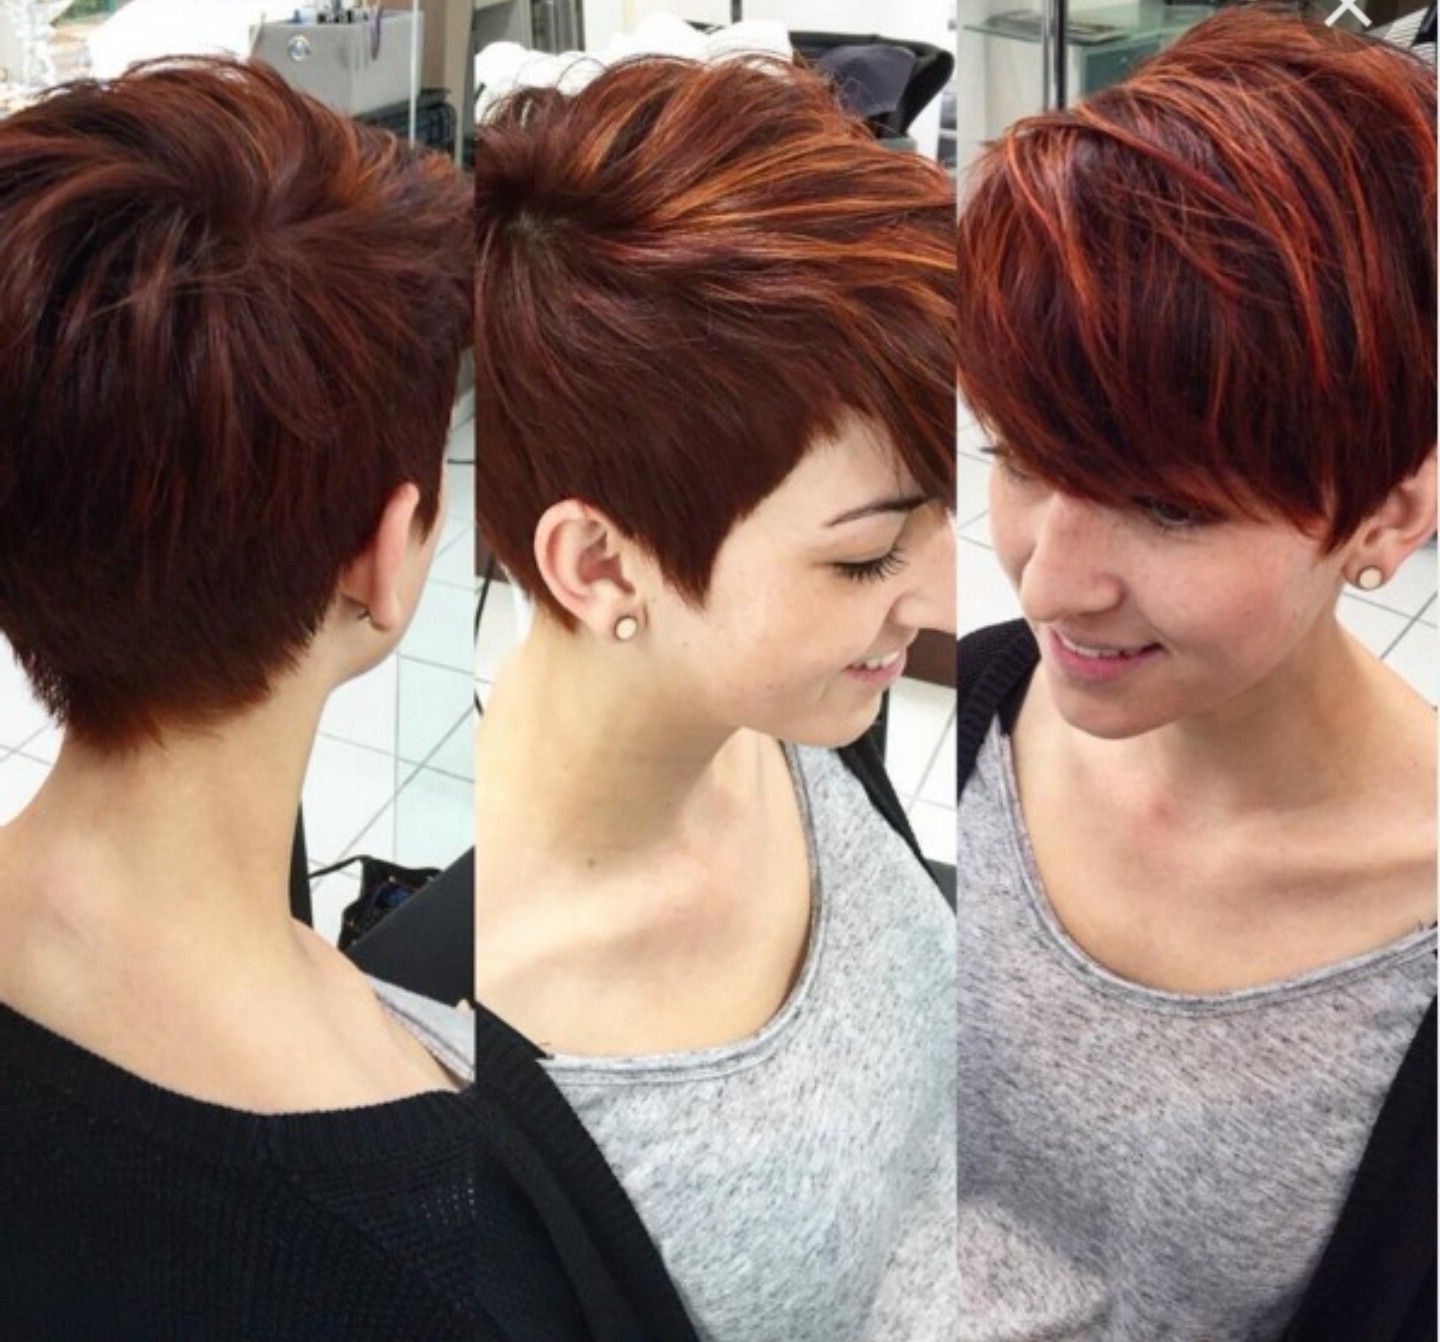 Caramel Colored Pixie With Long Side Bangs | Hair | Pinterest Intended For Most Up To Date Short Pixie Hairstyles With Bangs (View 9 of 15)